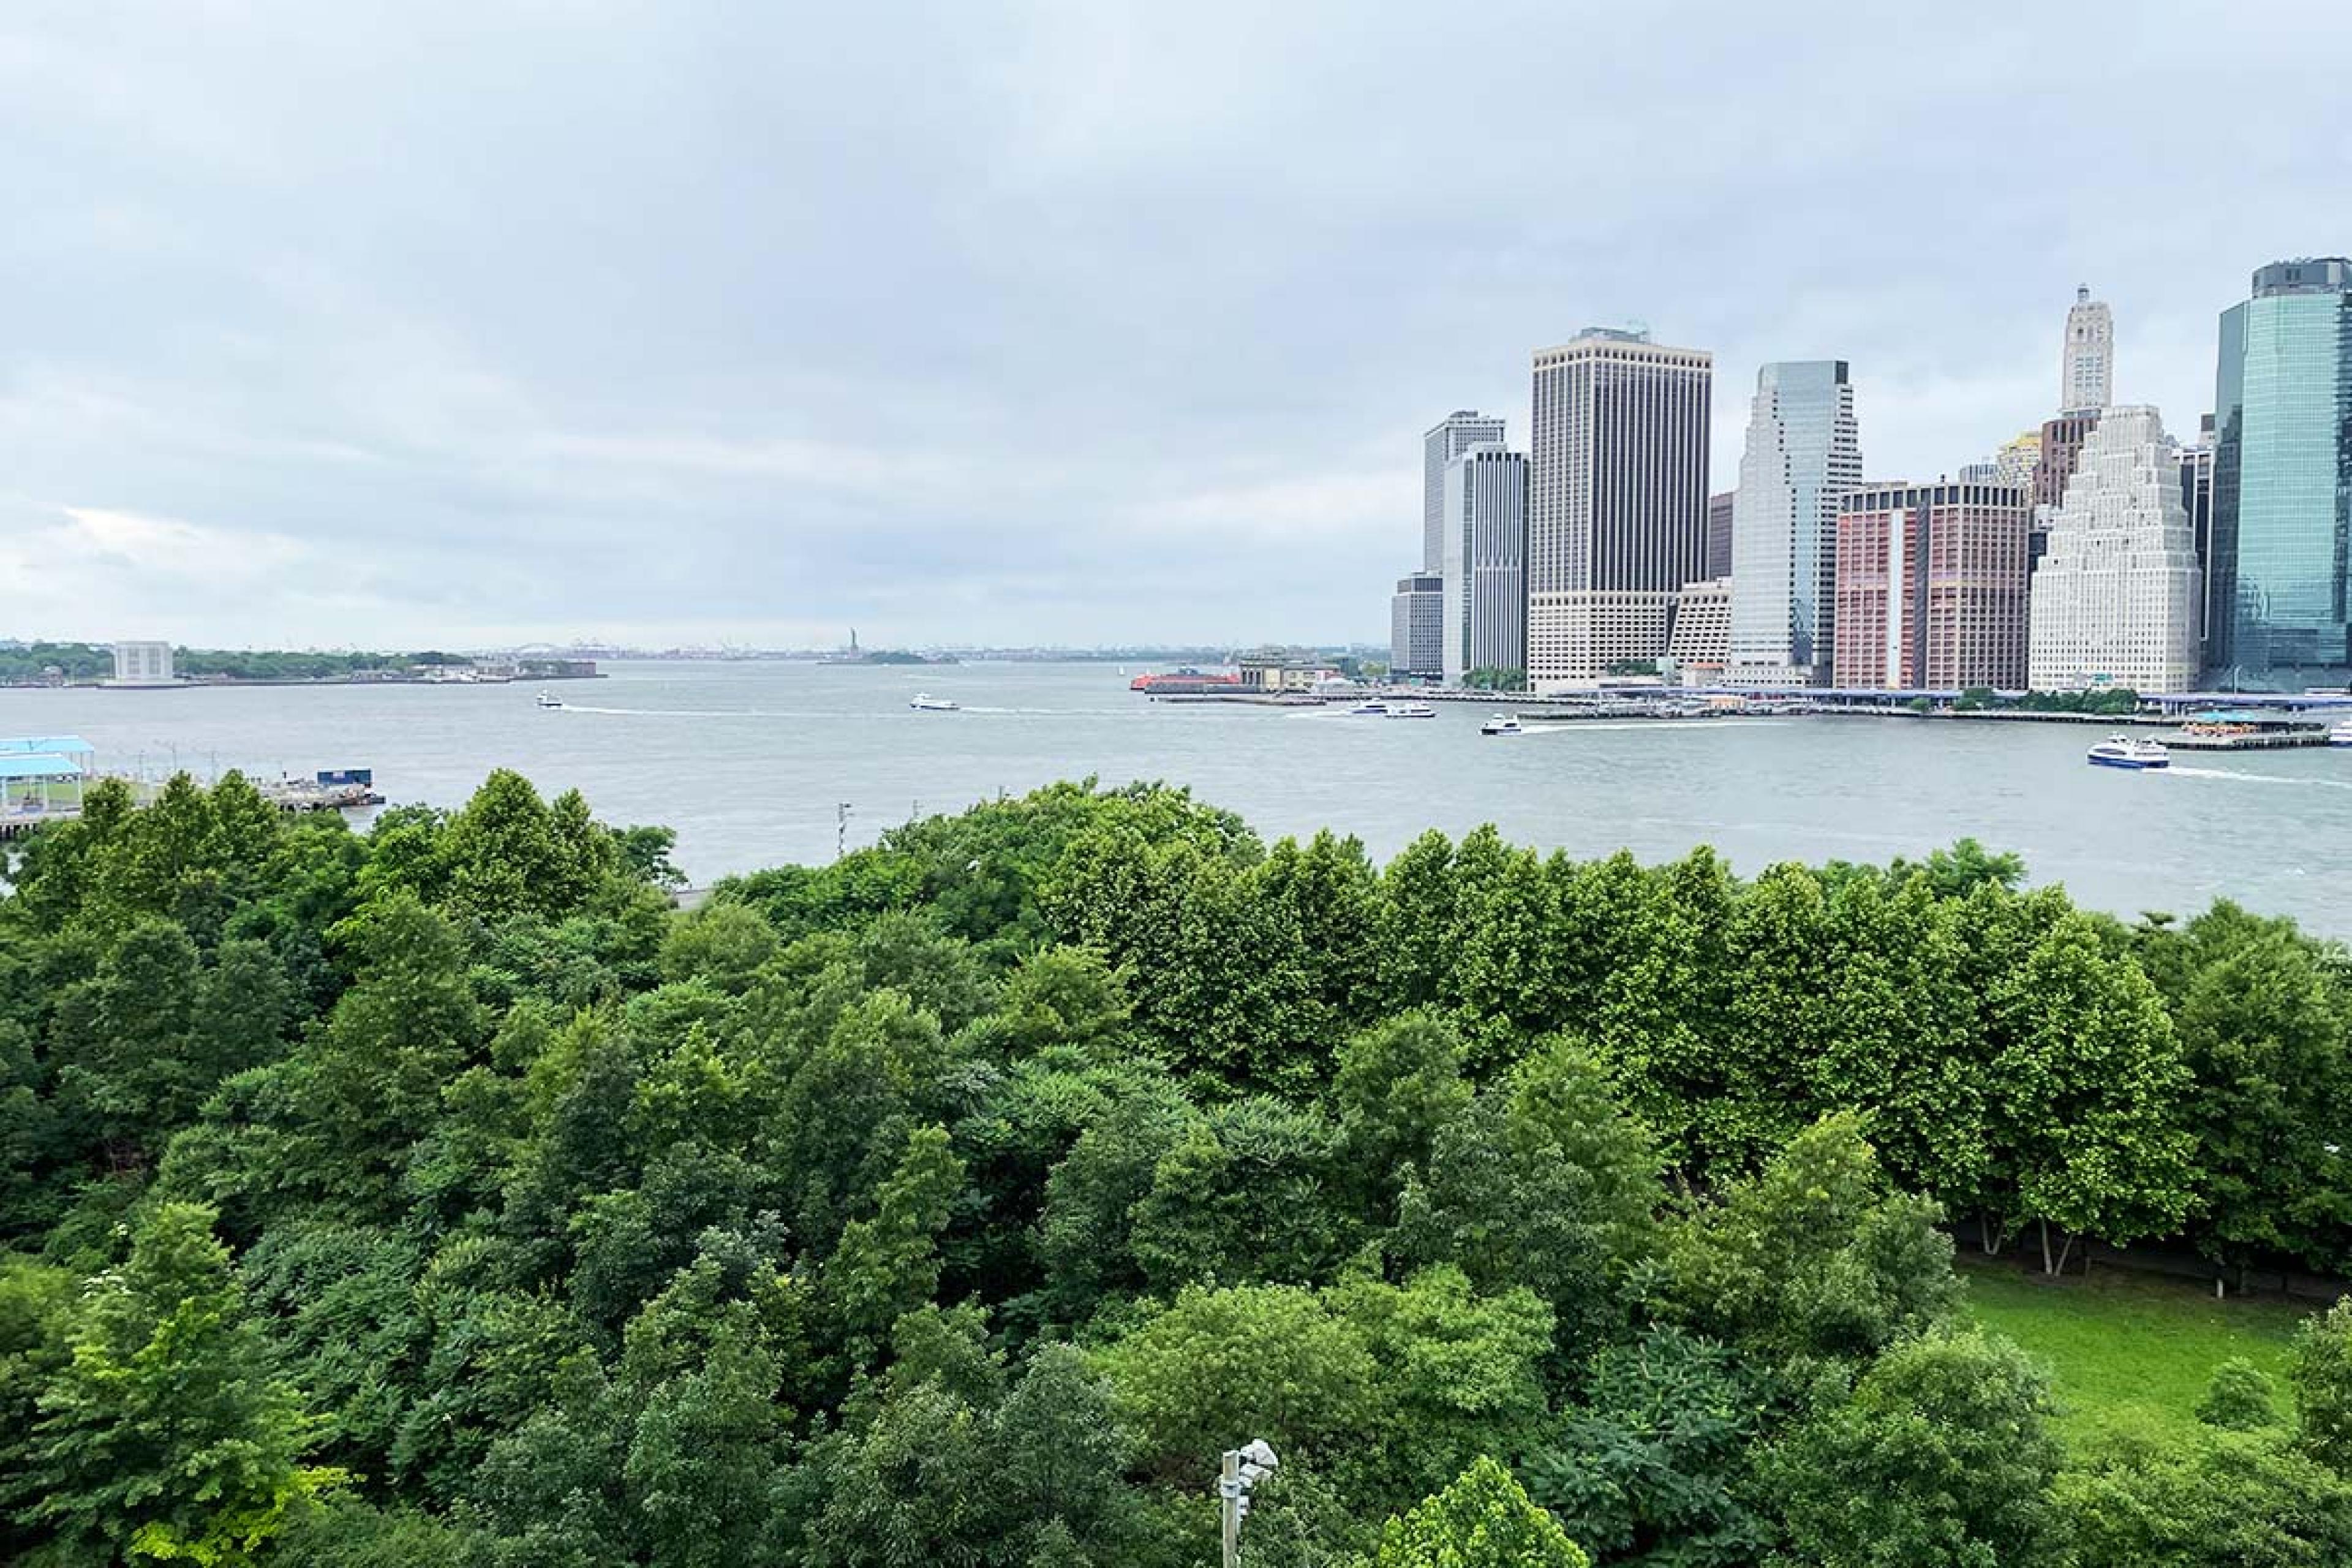 view over many trees in a park to water and lower manhattan skyline and statue of liberty